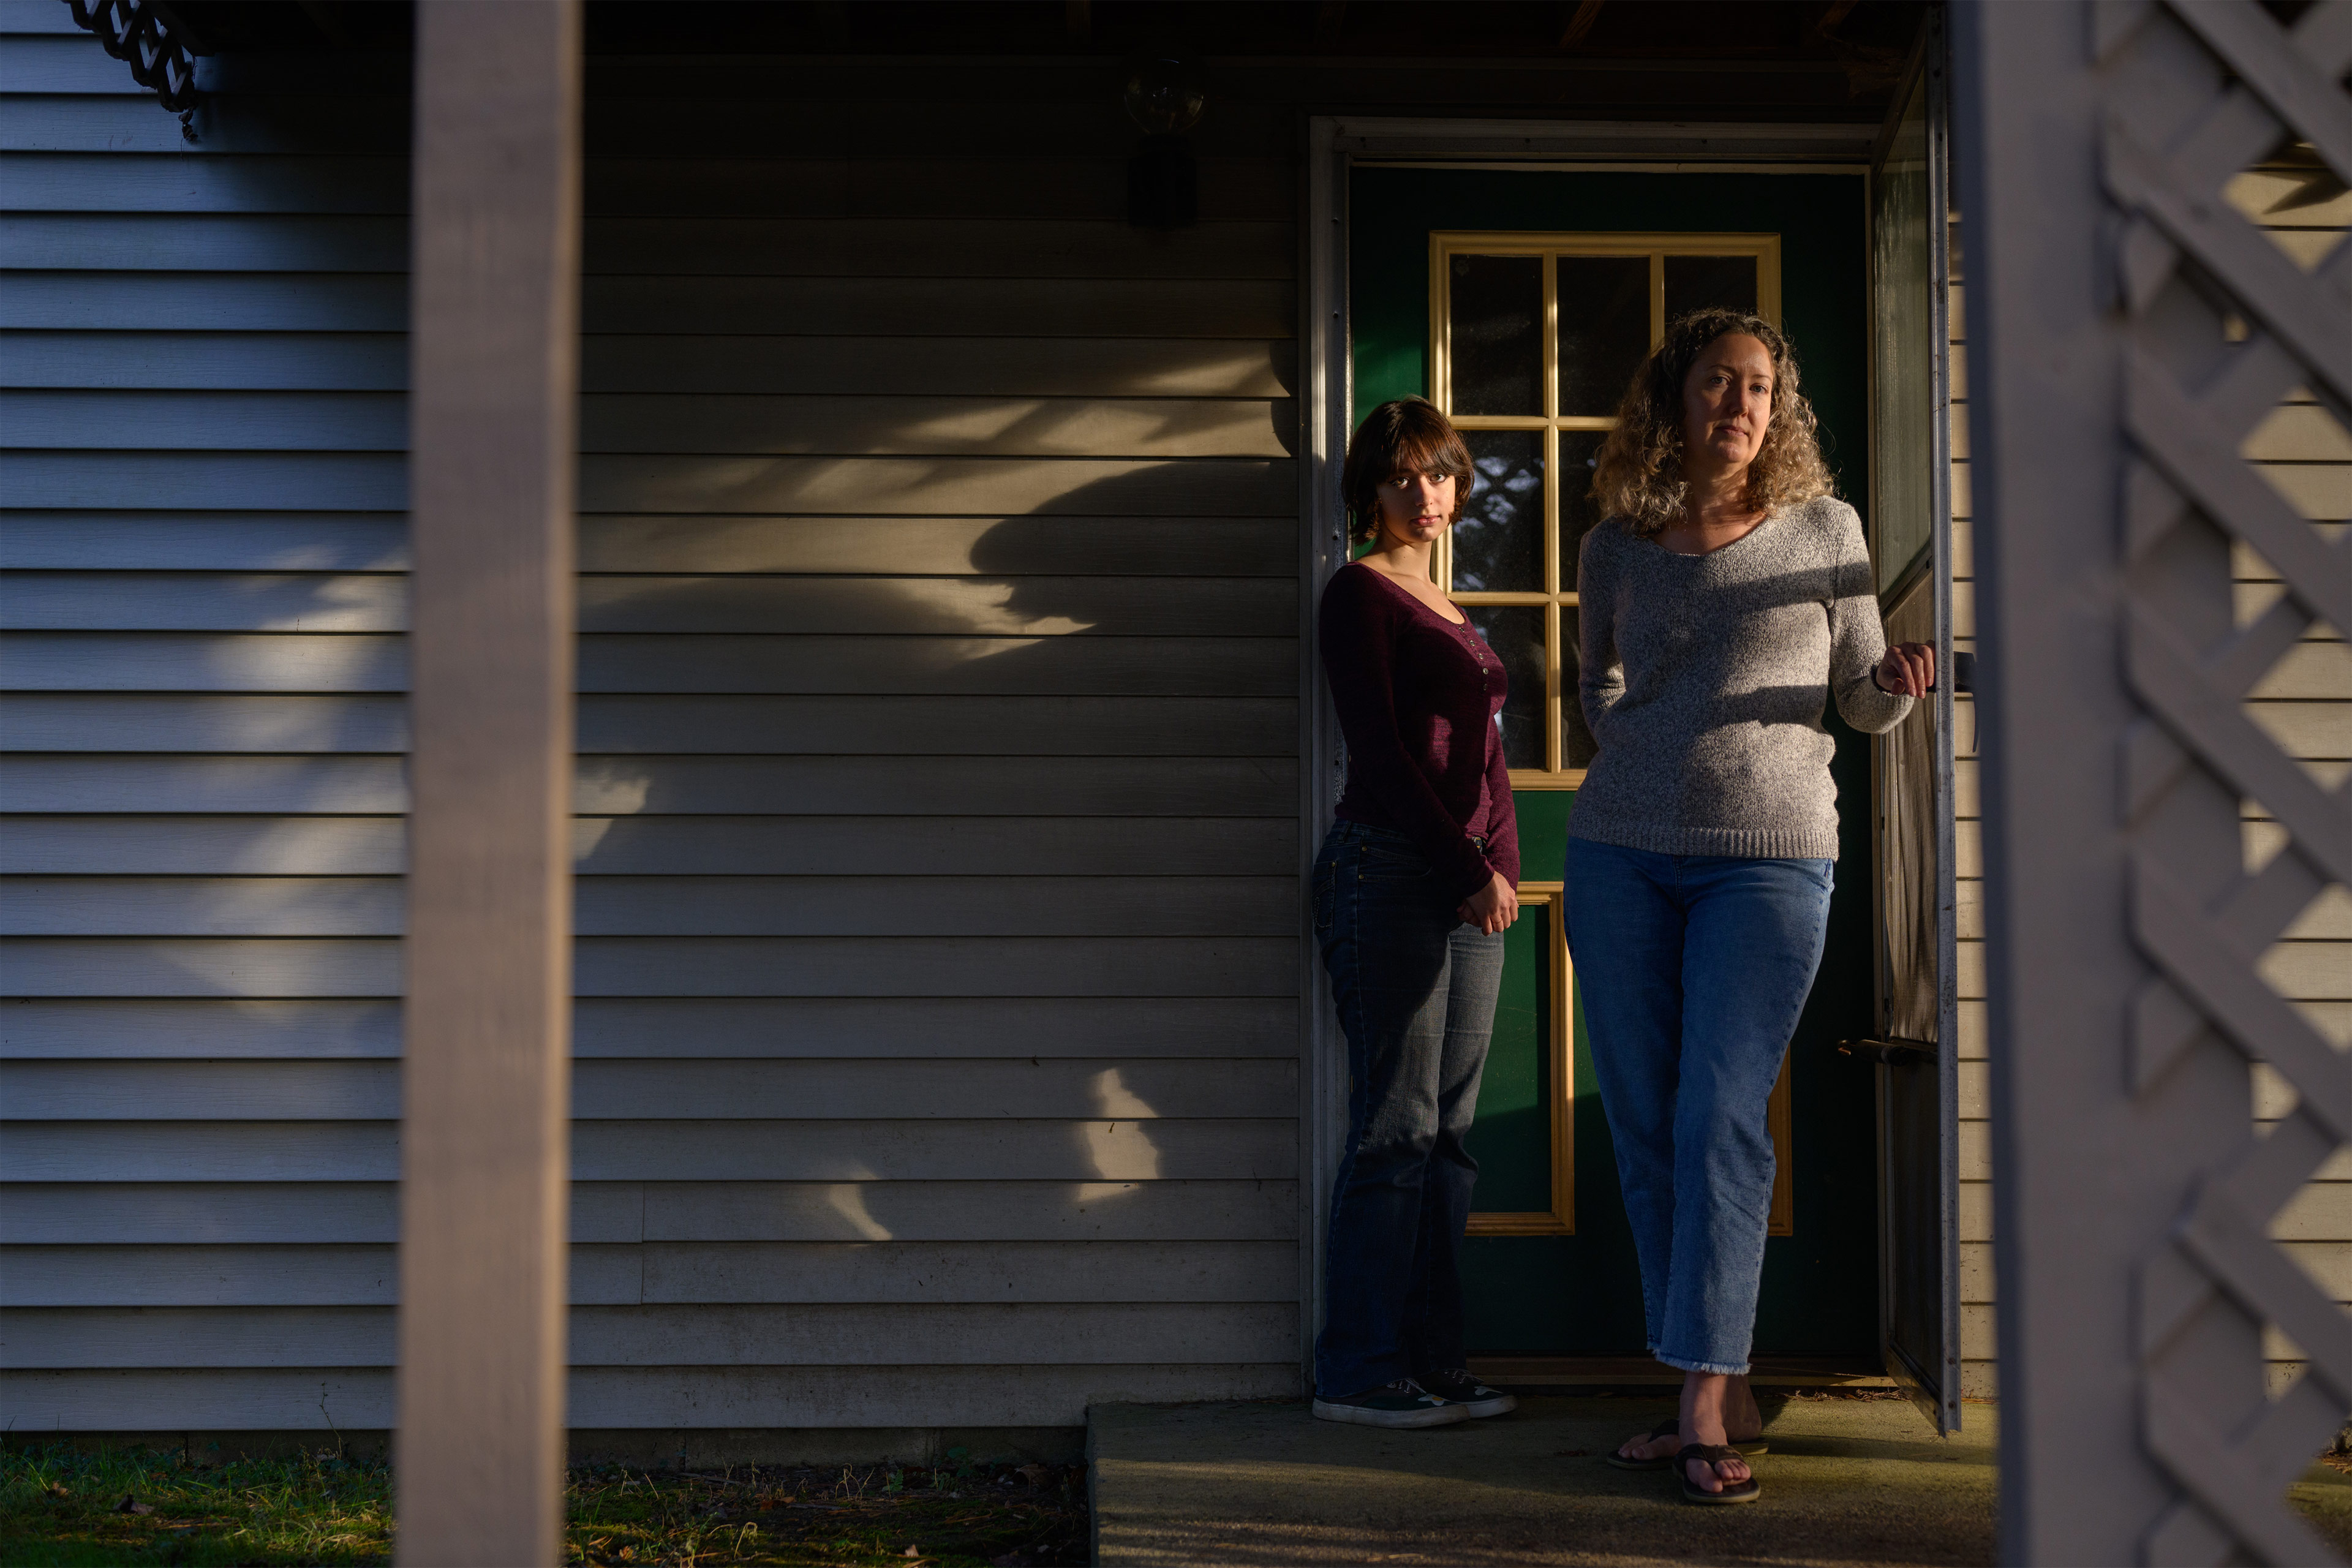 A photo shows Hawley Montgomery-Downs posing with her daughter Bryn outside their home.